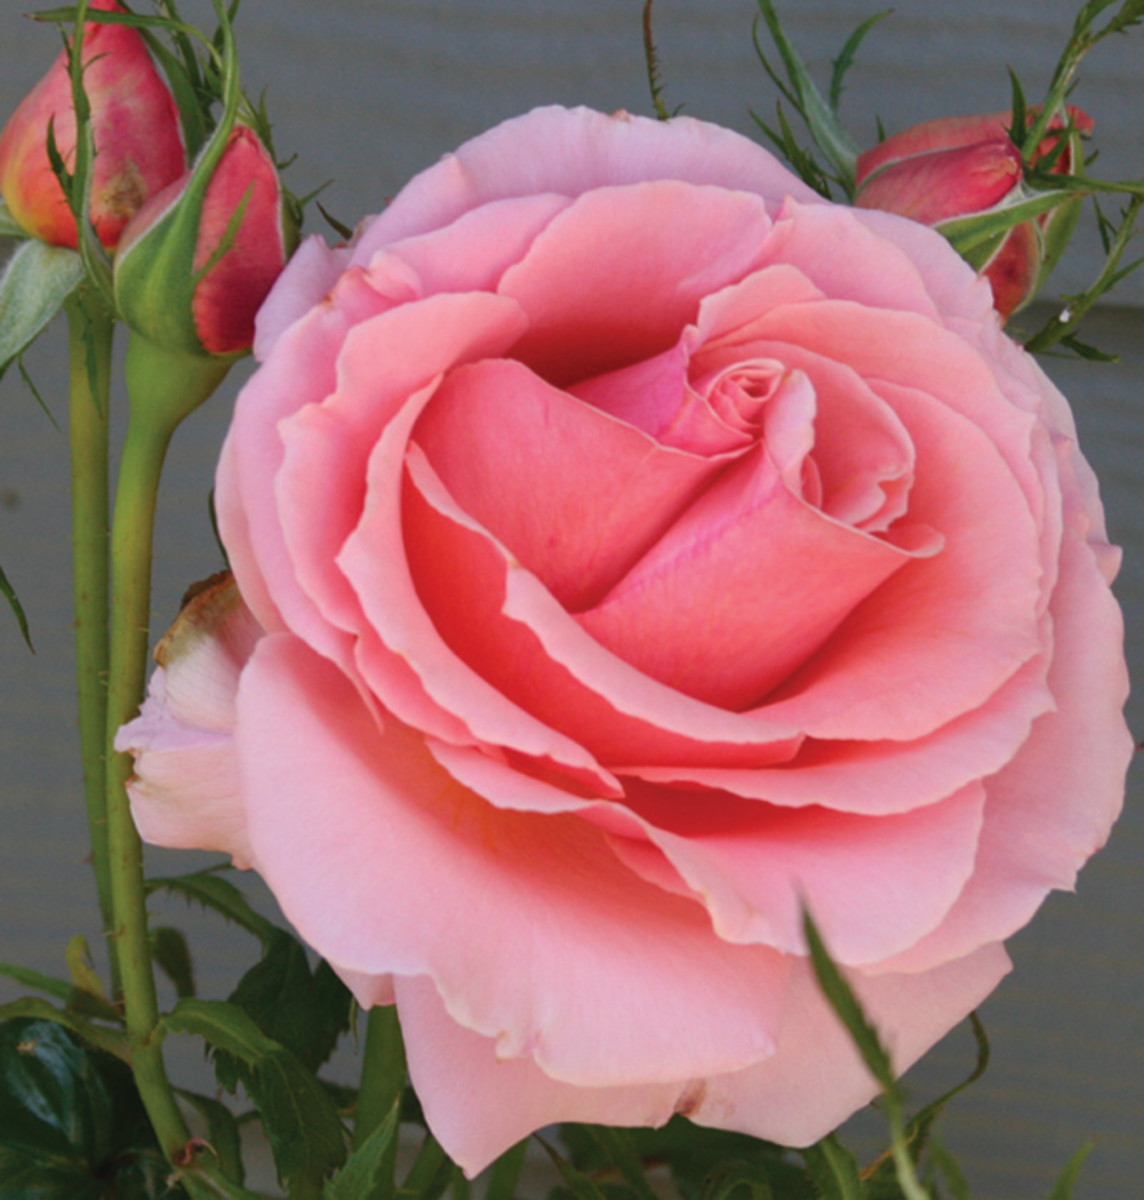 Awesome pink rose